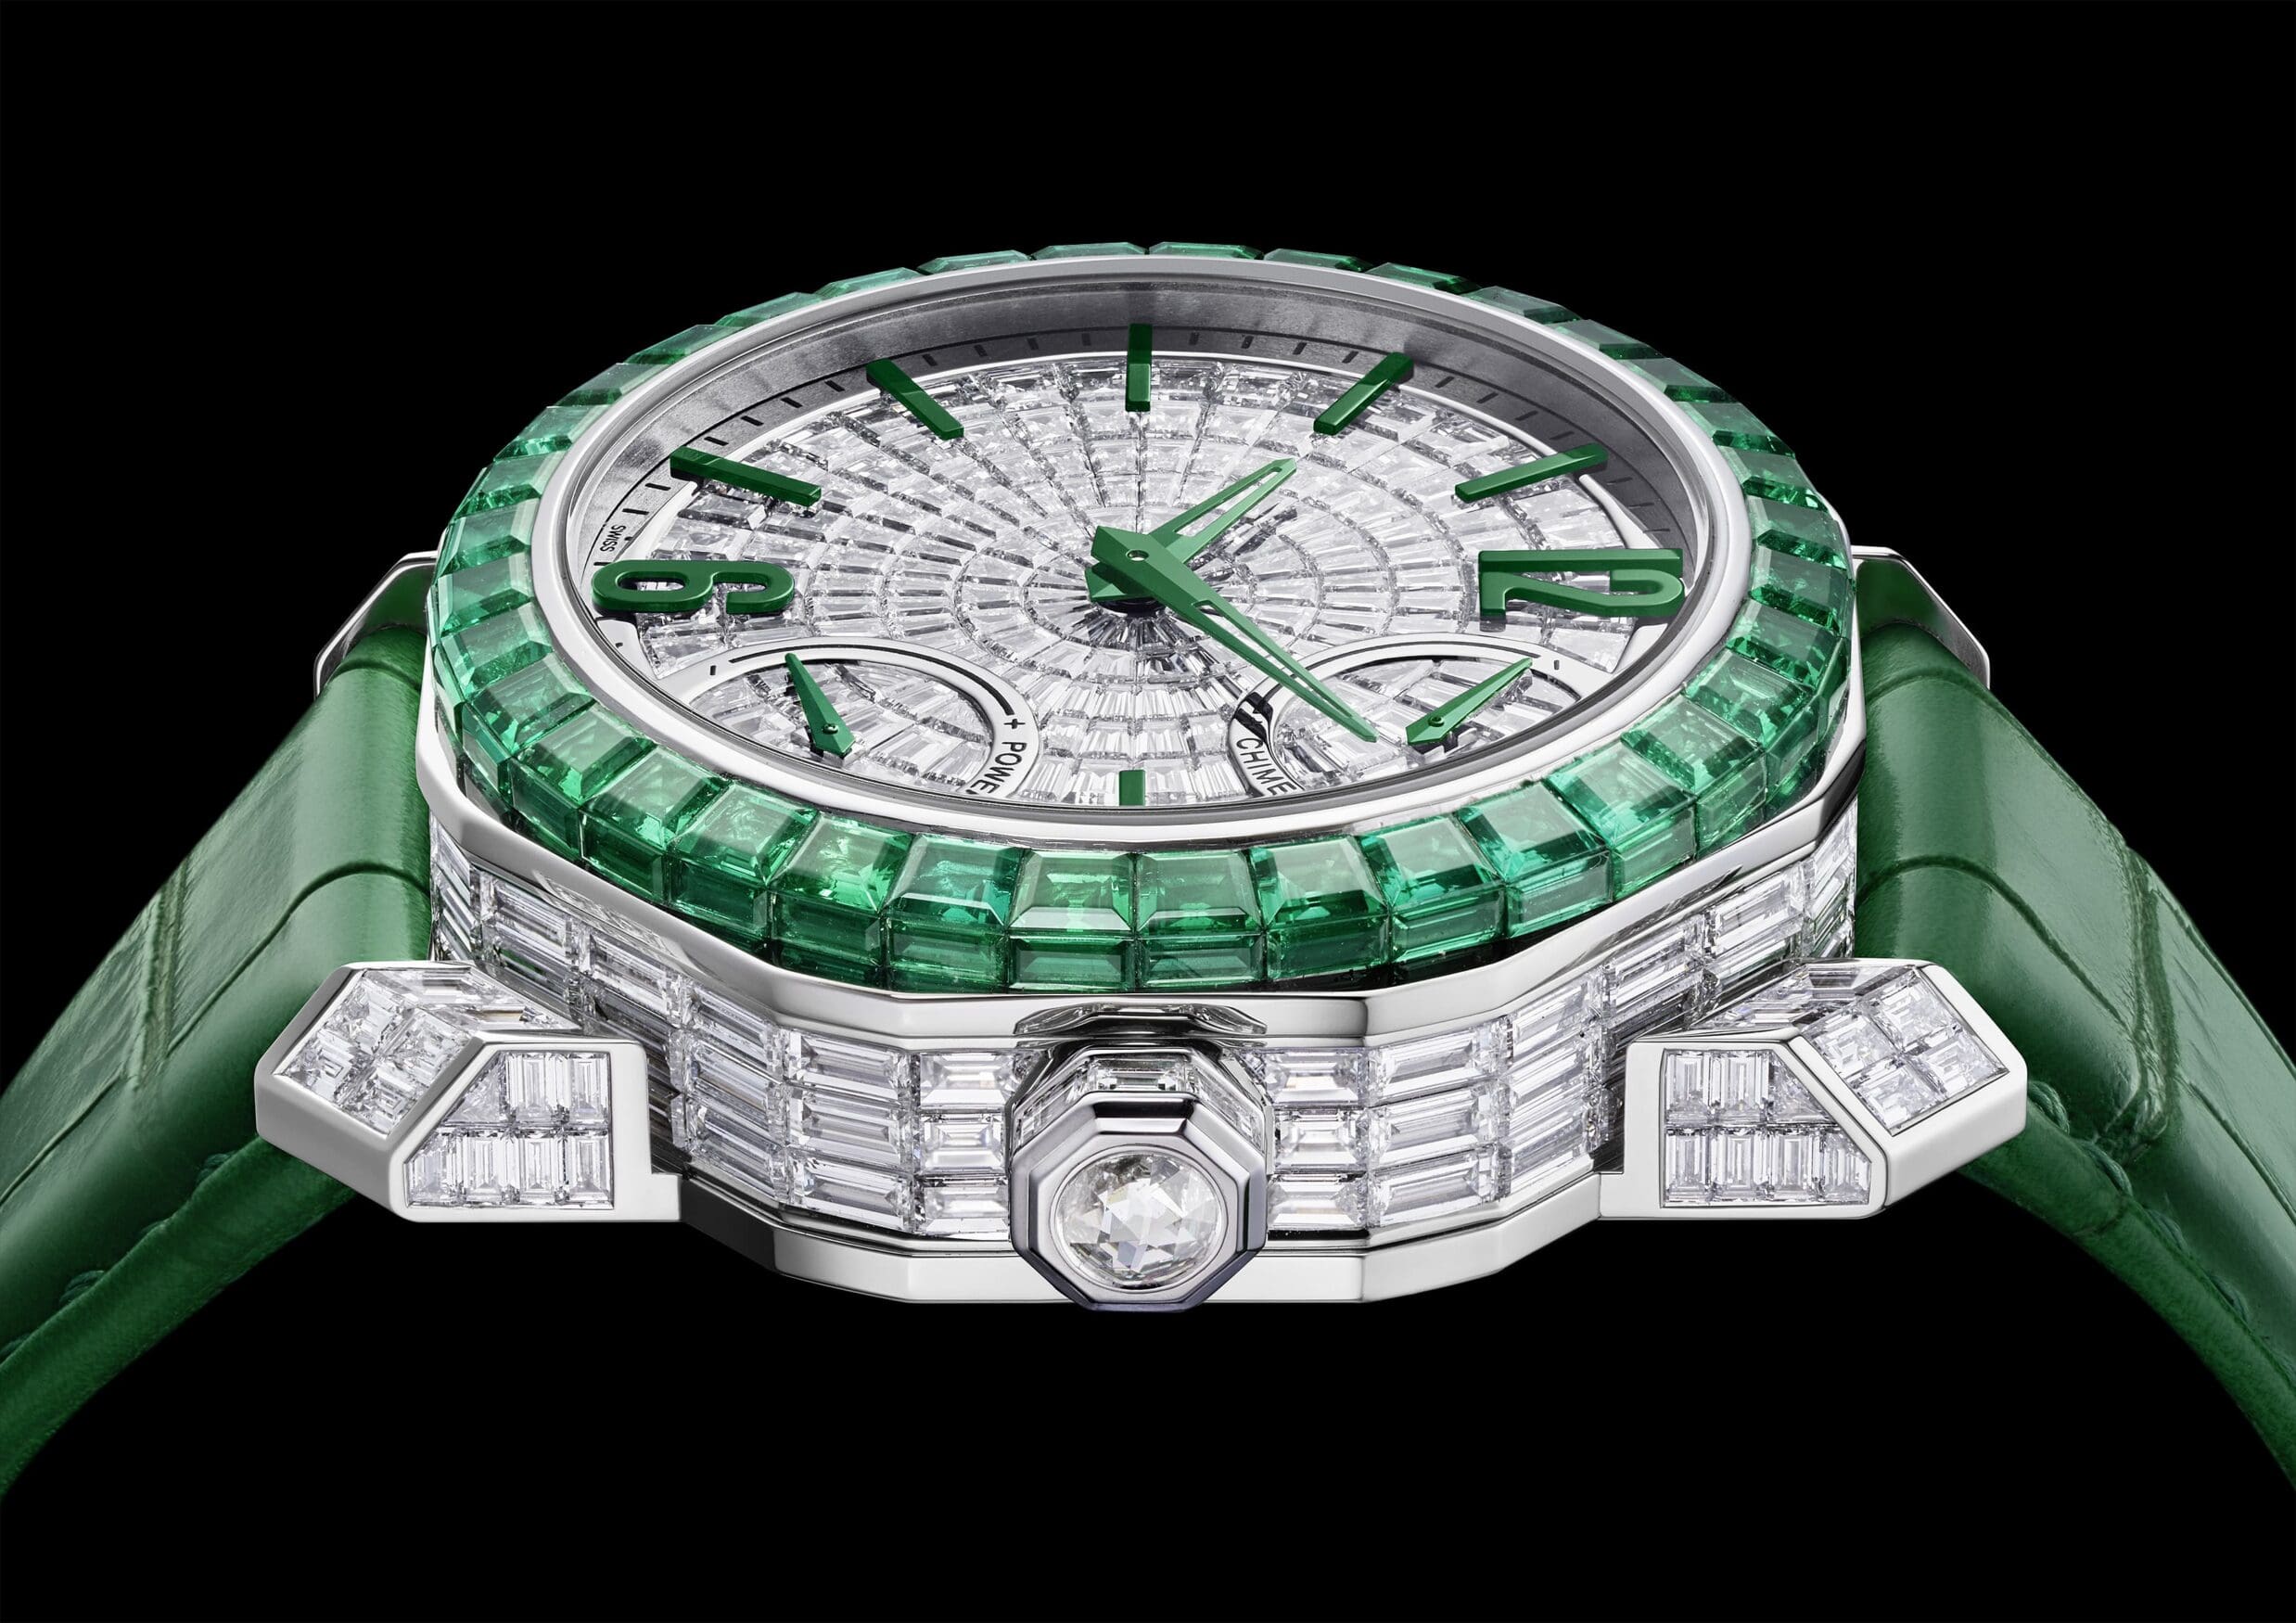 Bulgari flexes their mechanical mastery with new Octo Roma models